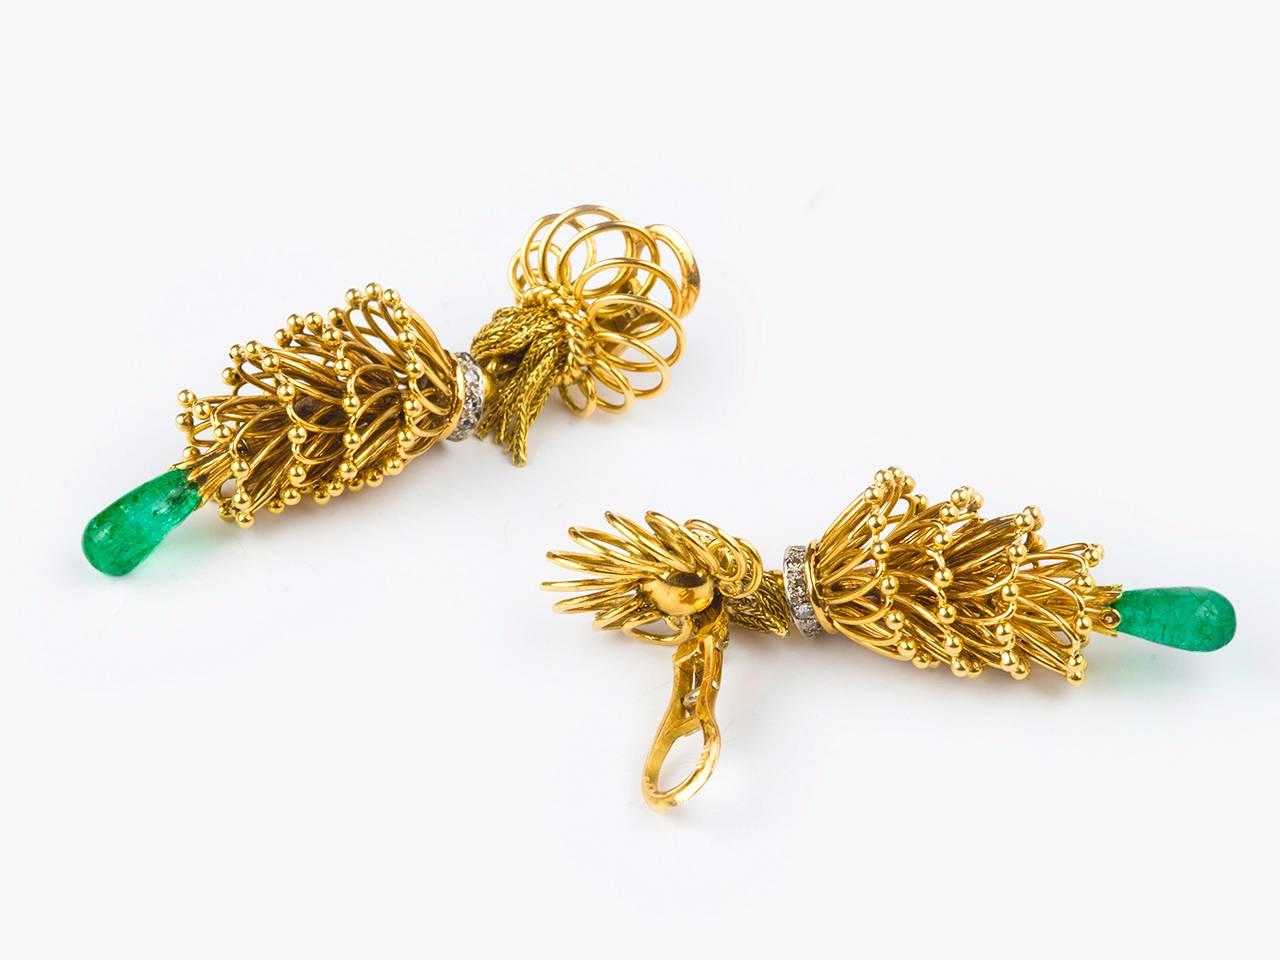 18k gold fring andtassel earpendants with diamond accents. French marks